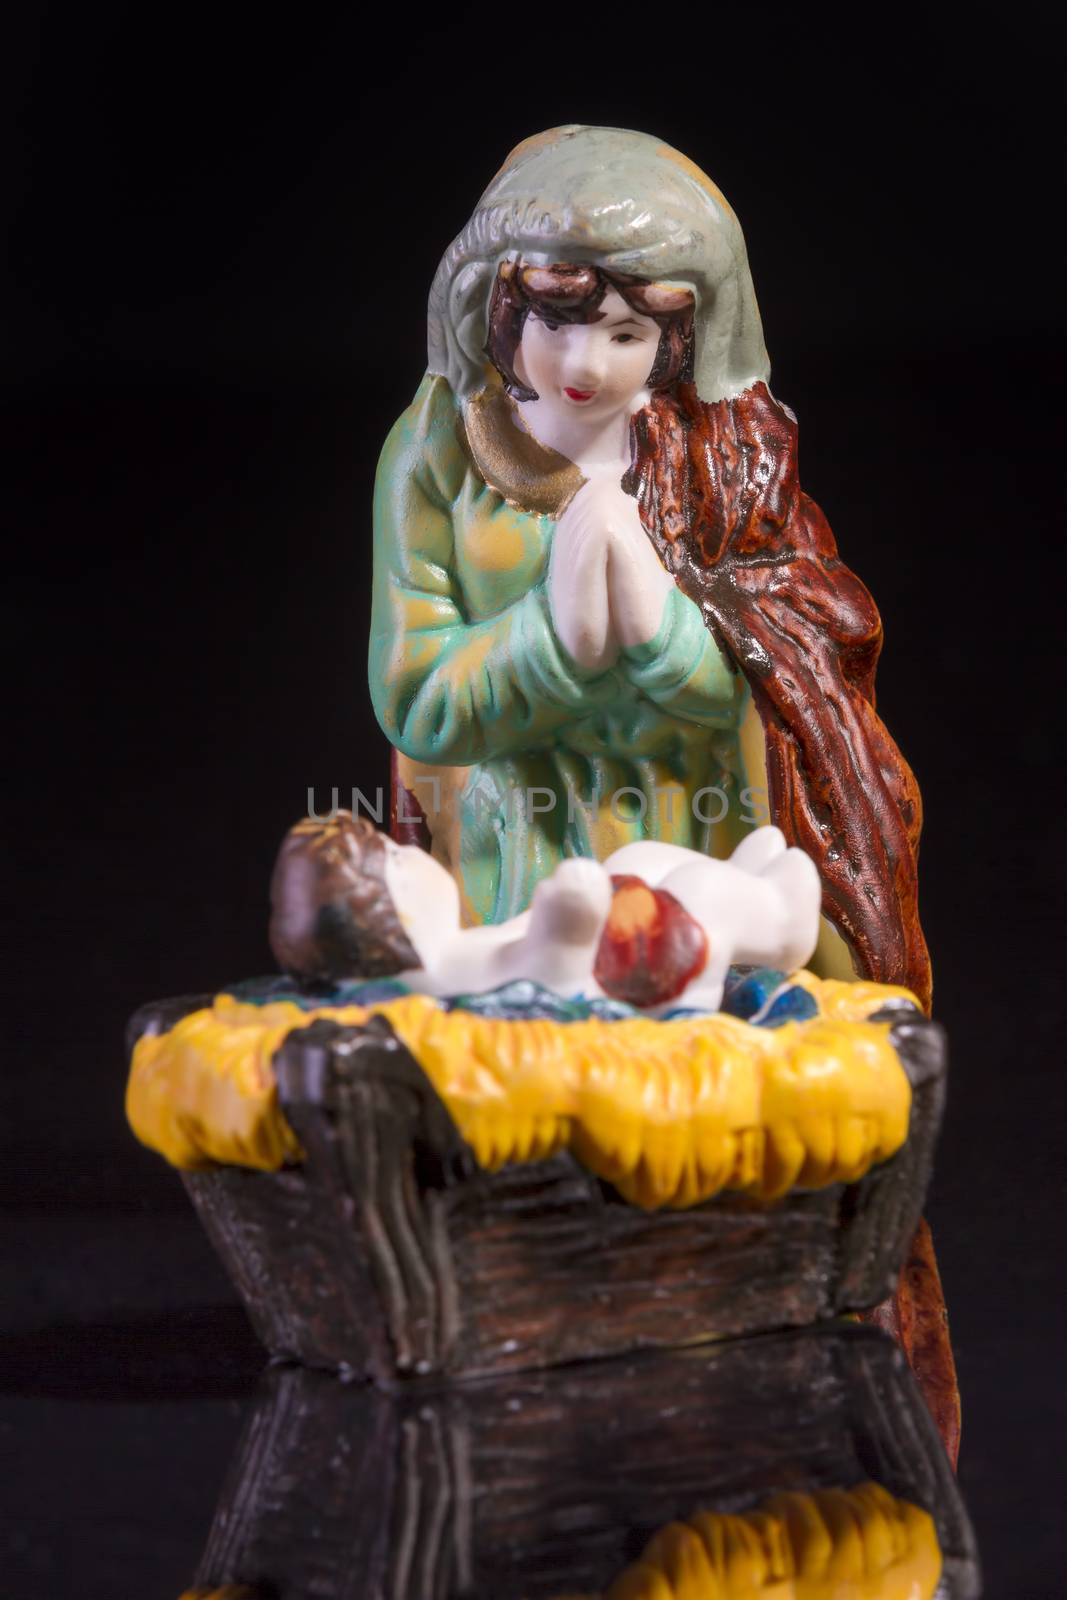 Christmas scene with Jesus and Mary on black background. Focus on Mary!